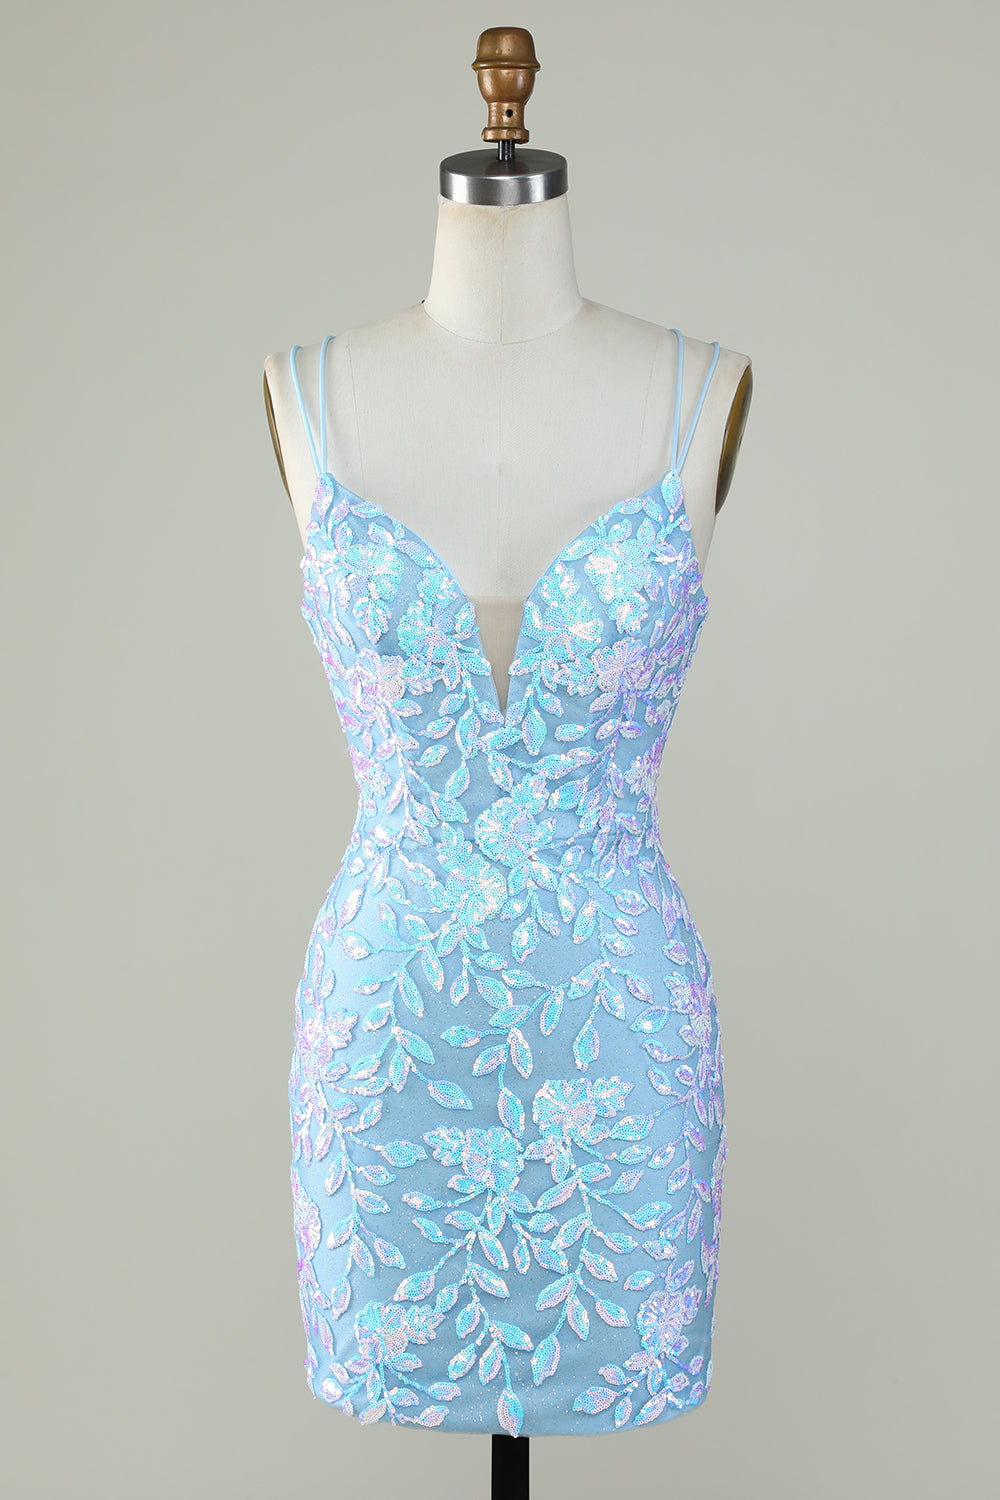 Sparkly Lace-Up Back Light Blue Homecoming Dress